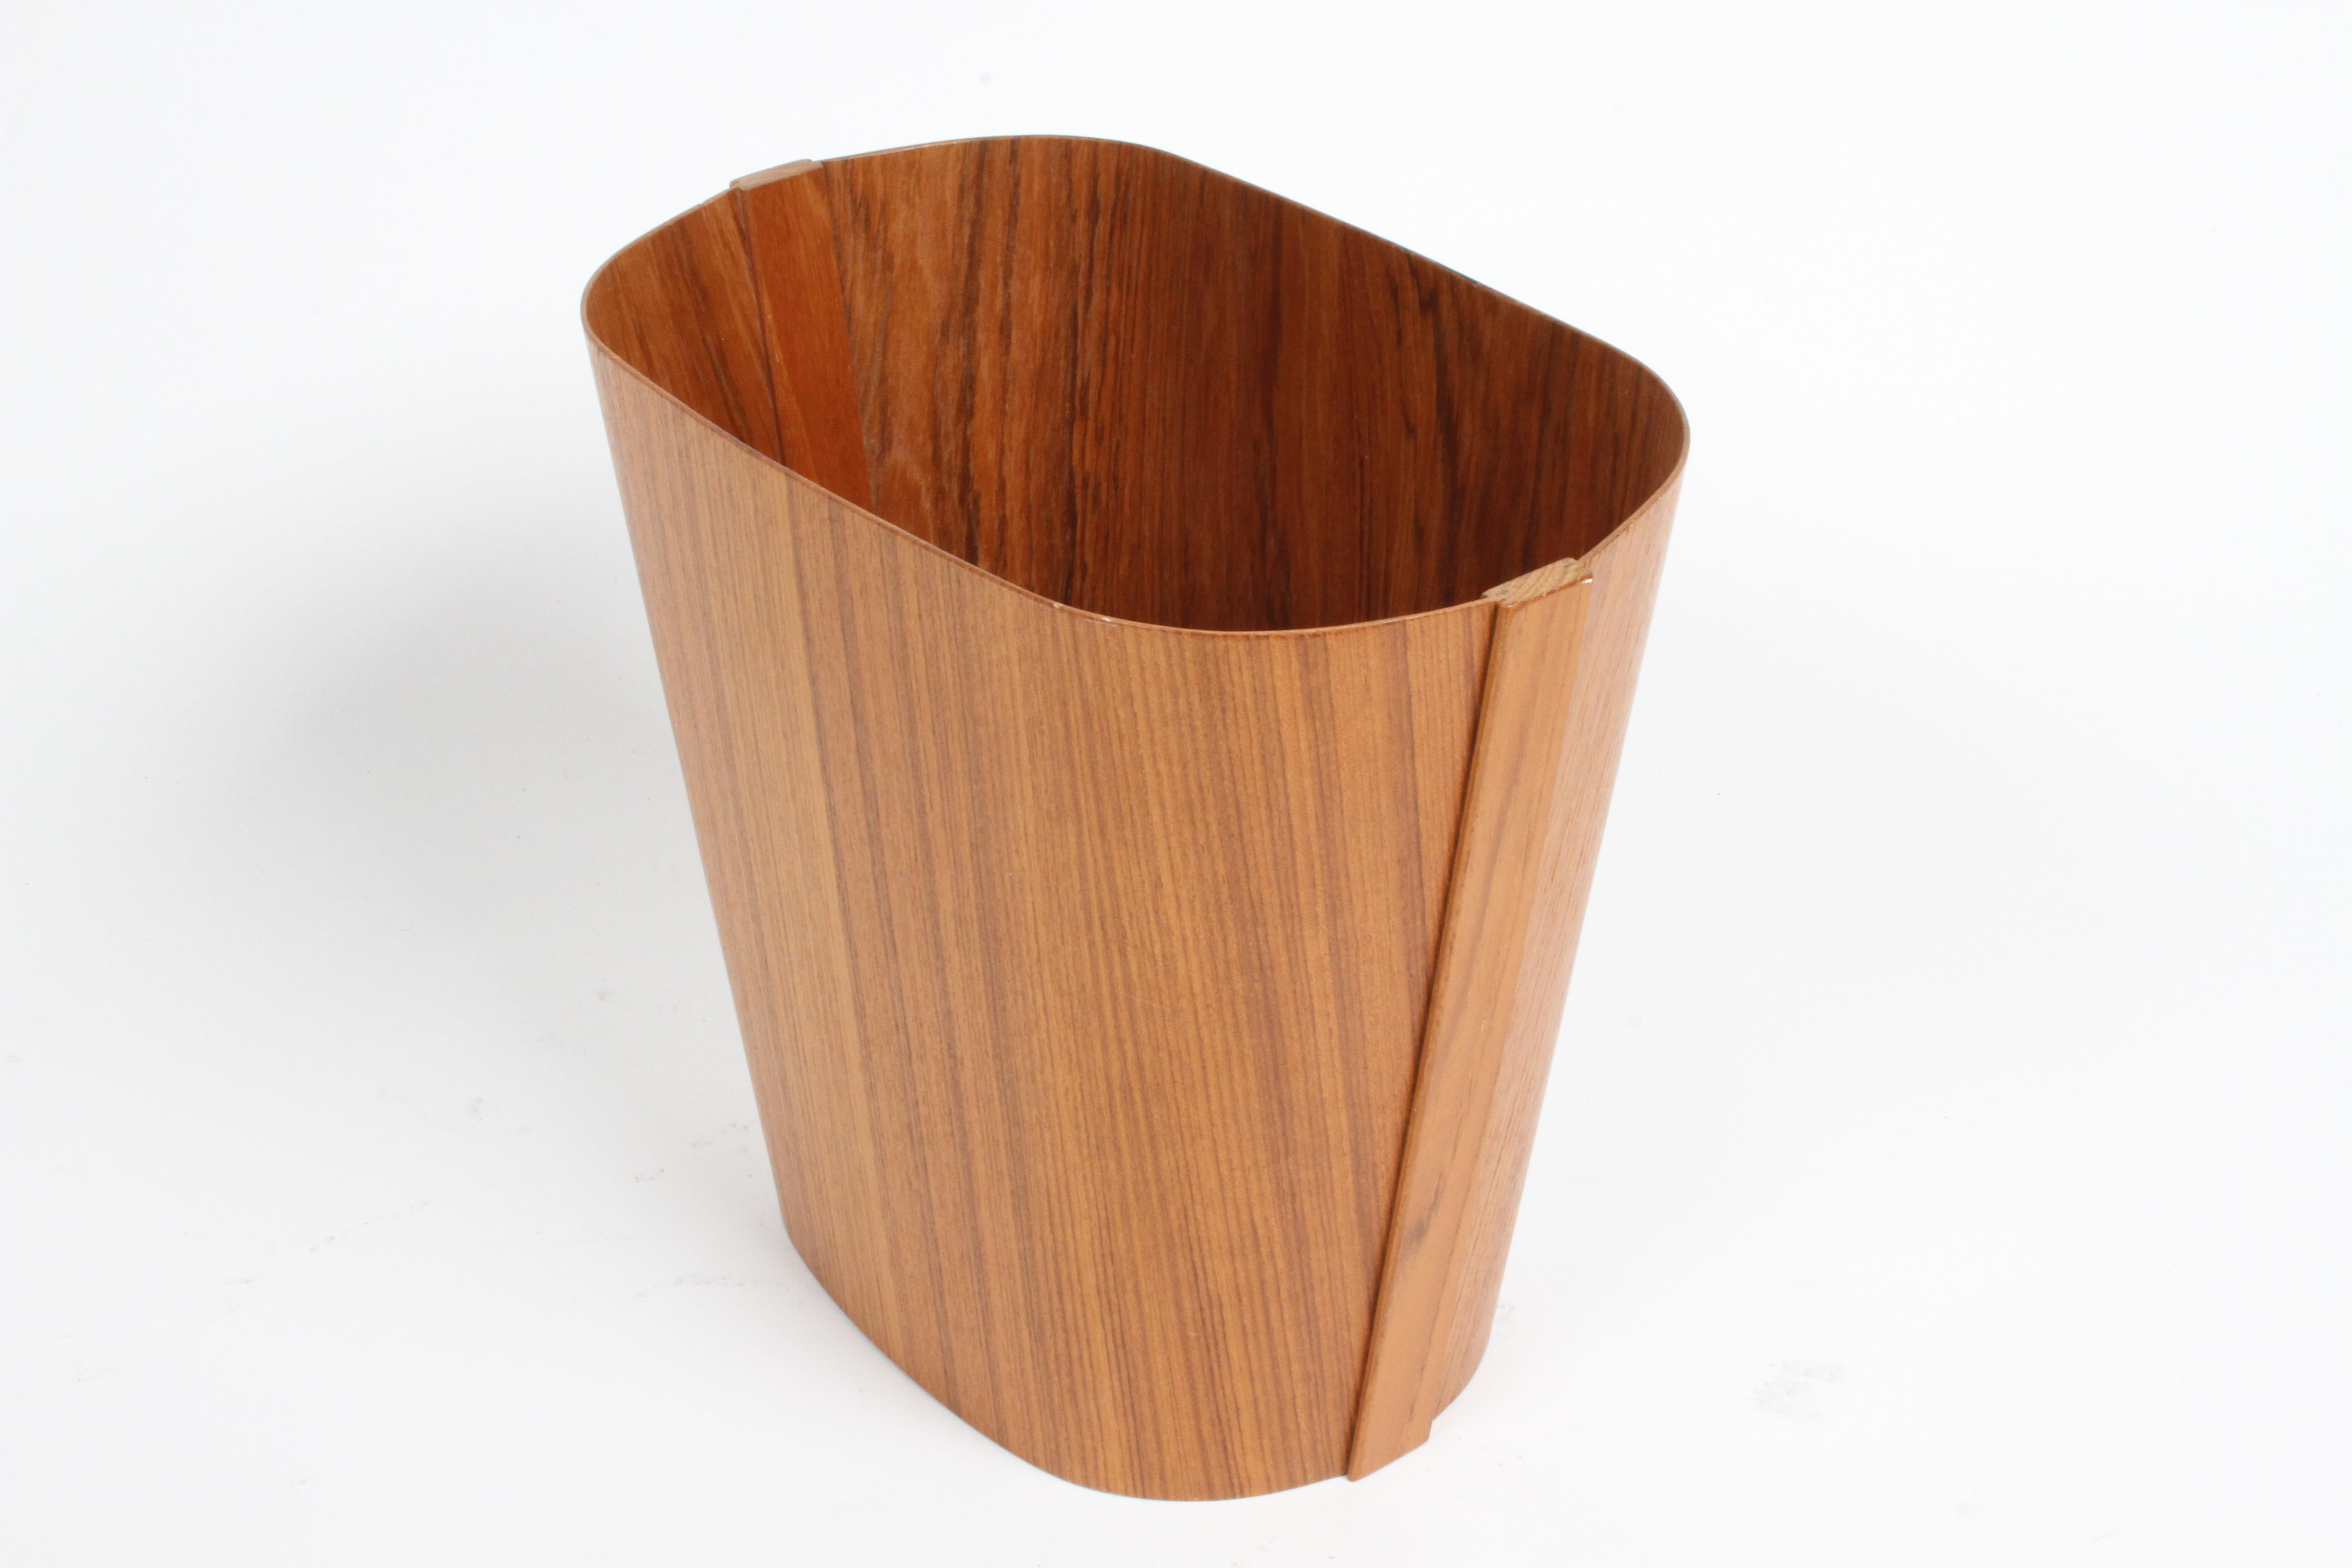 Danish Mid-Century Modern Beni Mobler Denmark Teak Waste Basket or Trash Can In Good Condition For Sale In St. Louis, MO